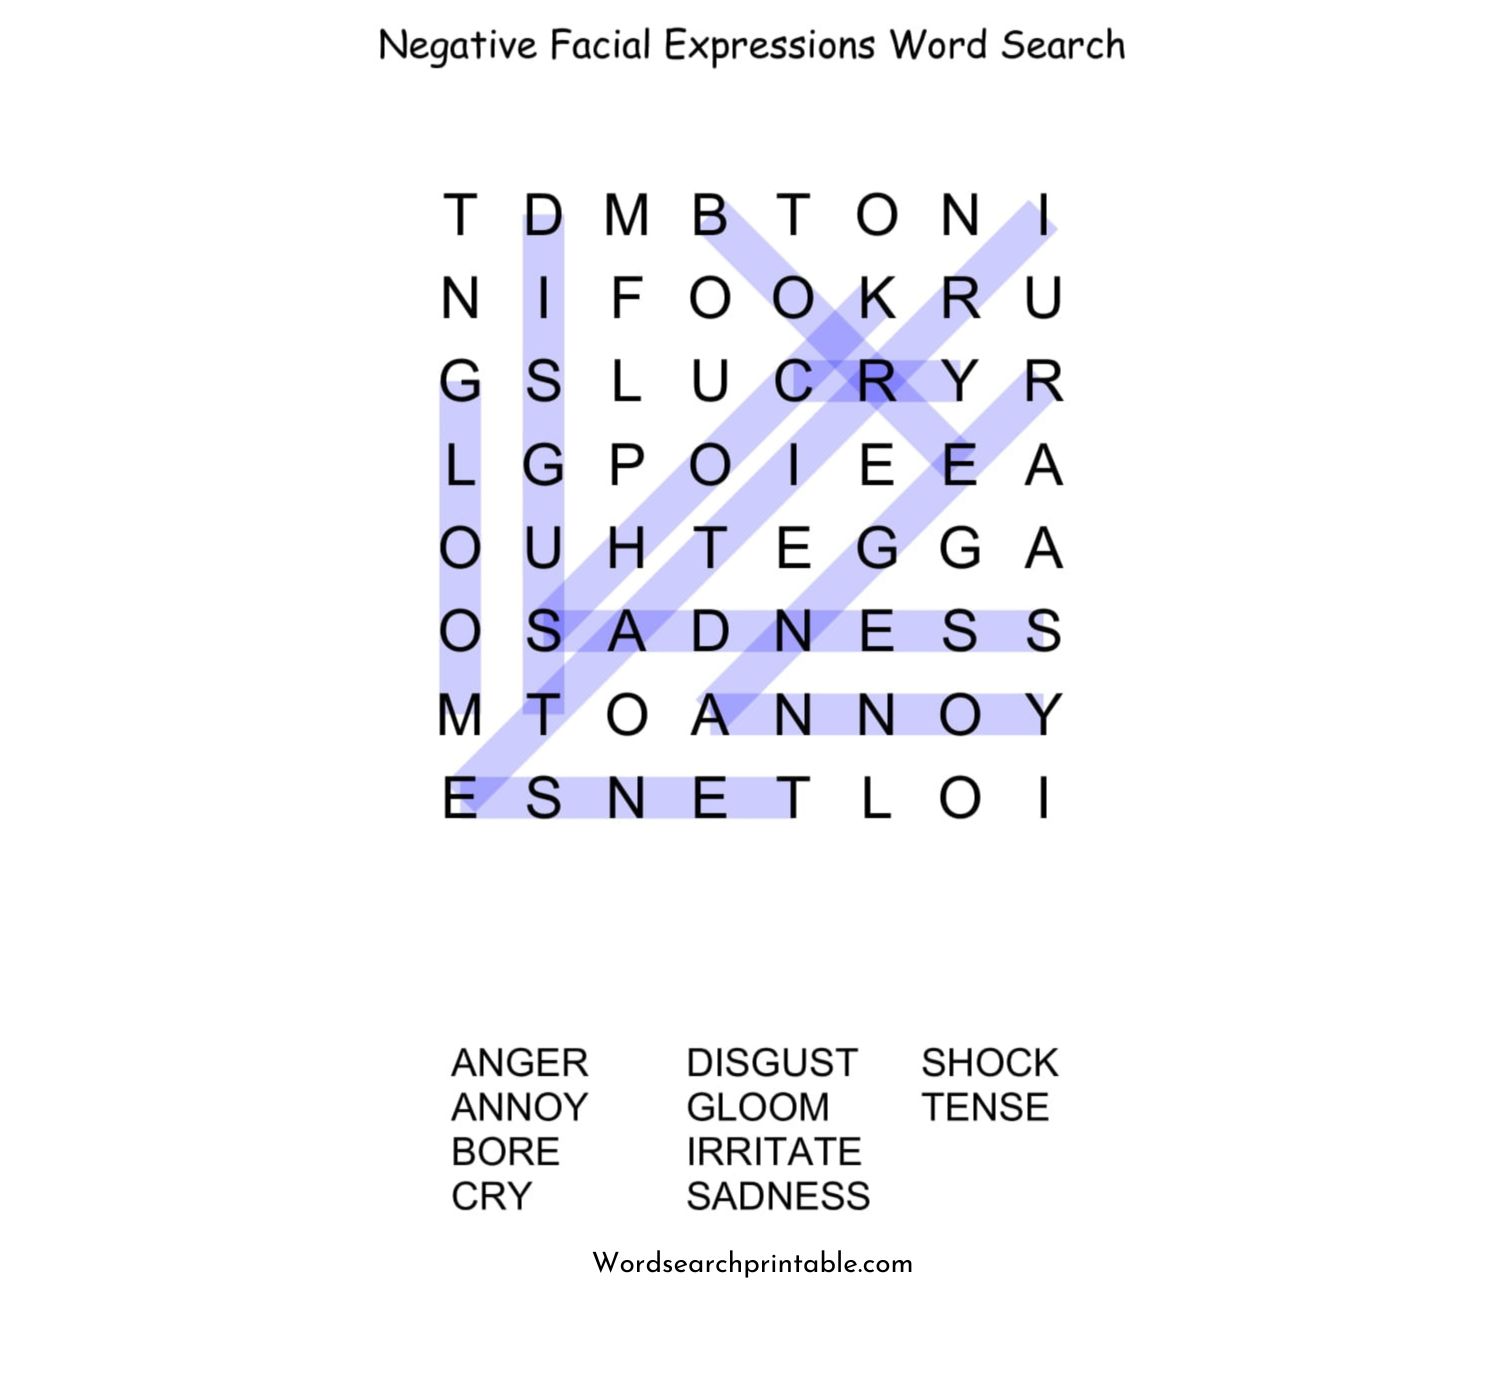 negative facial expressions word search puzzle solution